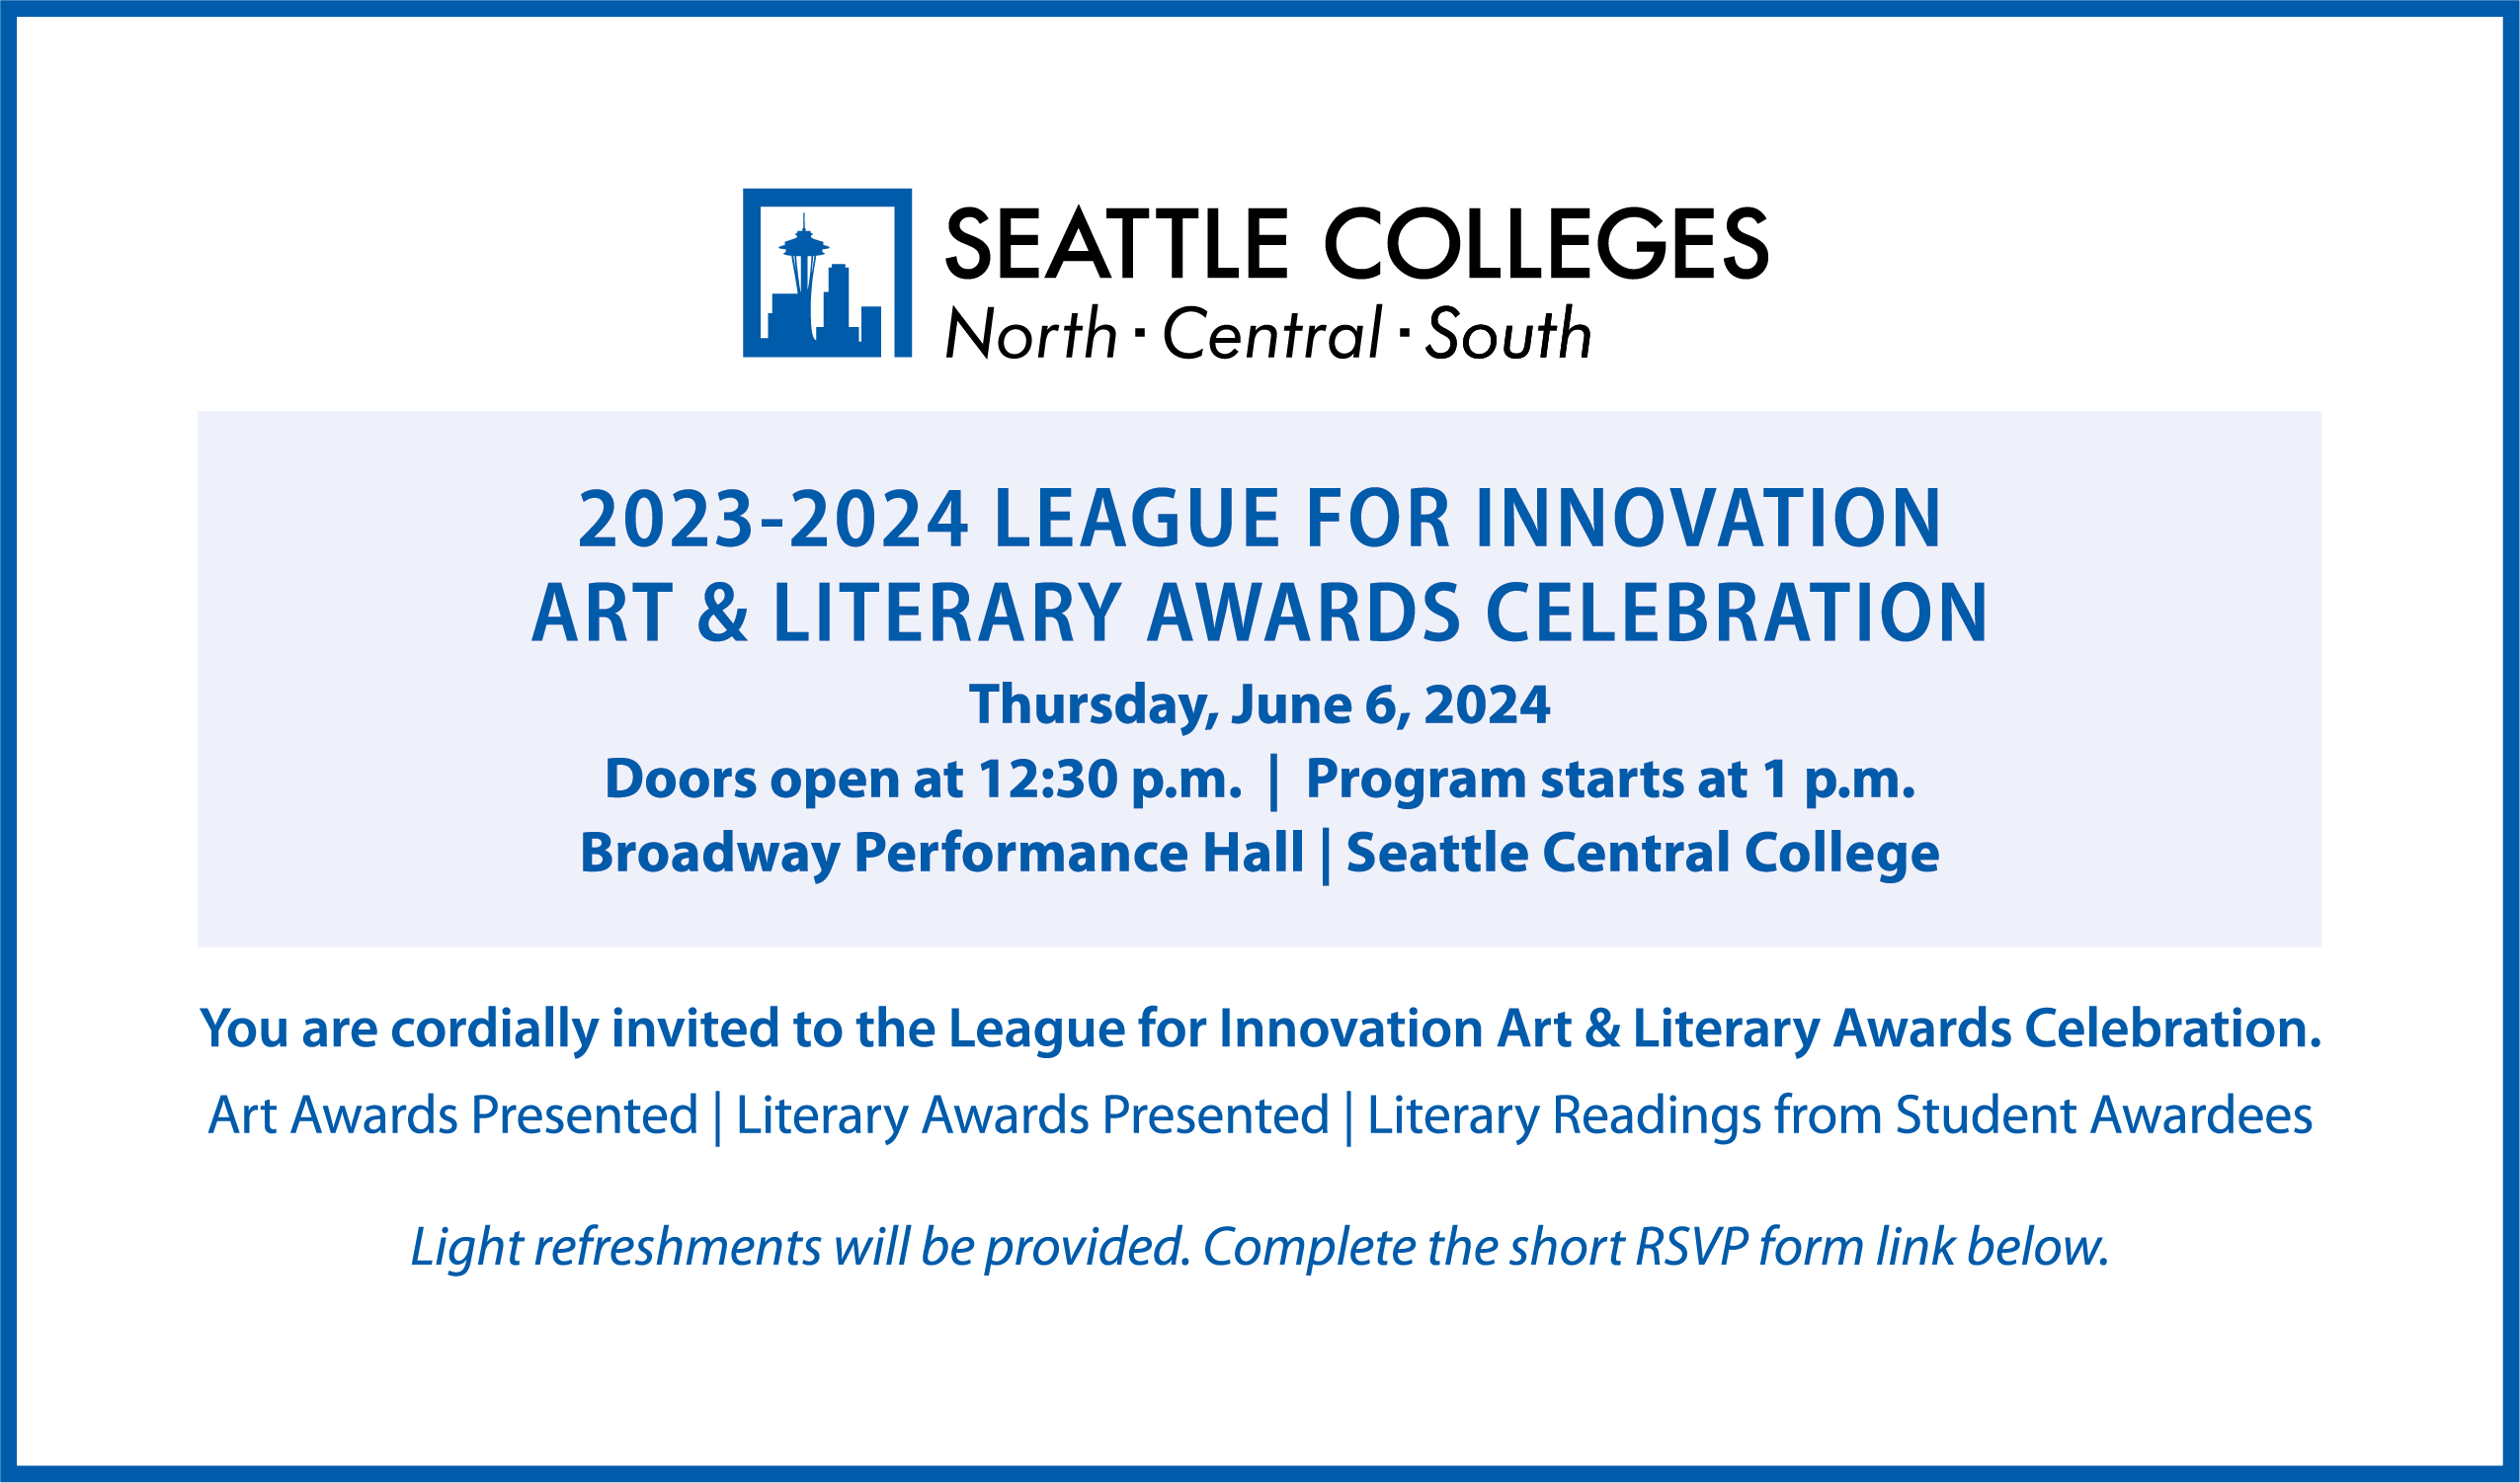 Student Art and Literary Awards Celebration  Members of the Seattle Colleges community are invited to attend the League for Innovation Art and Literary Award Celebration.  League for Innovation Student Art and Literary Awards Celebration  When: Thursday, June 6, 2024 – doors open at 12:30 p.m.; program starts at 1 p.m.  Where: Broadway Performance Hall, Seattle Central College, 1625 Broadway Avenue, Seattle, WA 98122  The program will include:  Presentation of art awards  Presentation of literary awards  Literary readings from student awardees  Light refreshments will be served.  All student entrants are encouraged to attend. Guests are welcome. If you plan to attend, please complete the form to RSVP (note: form is in the text above this image).